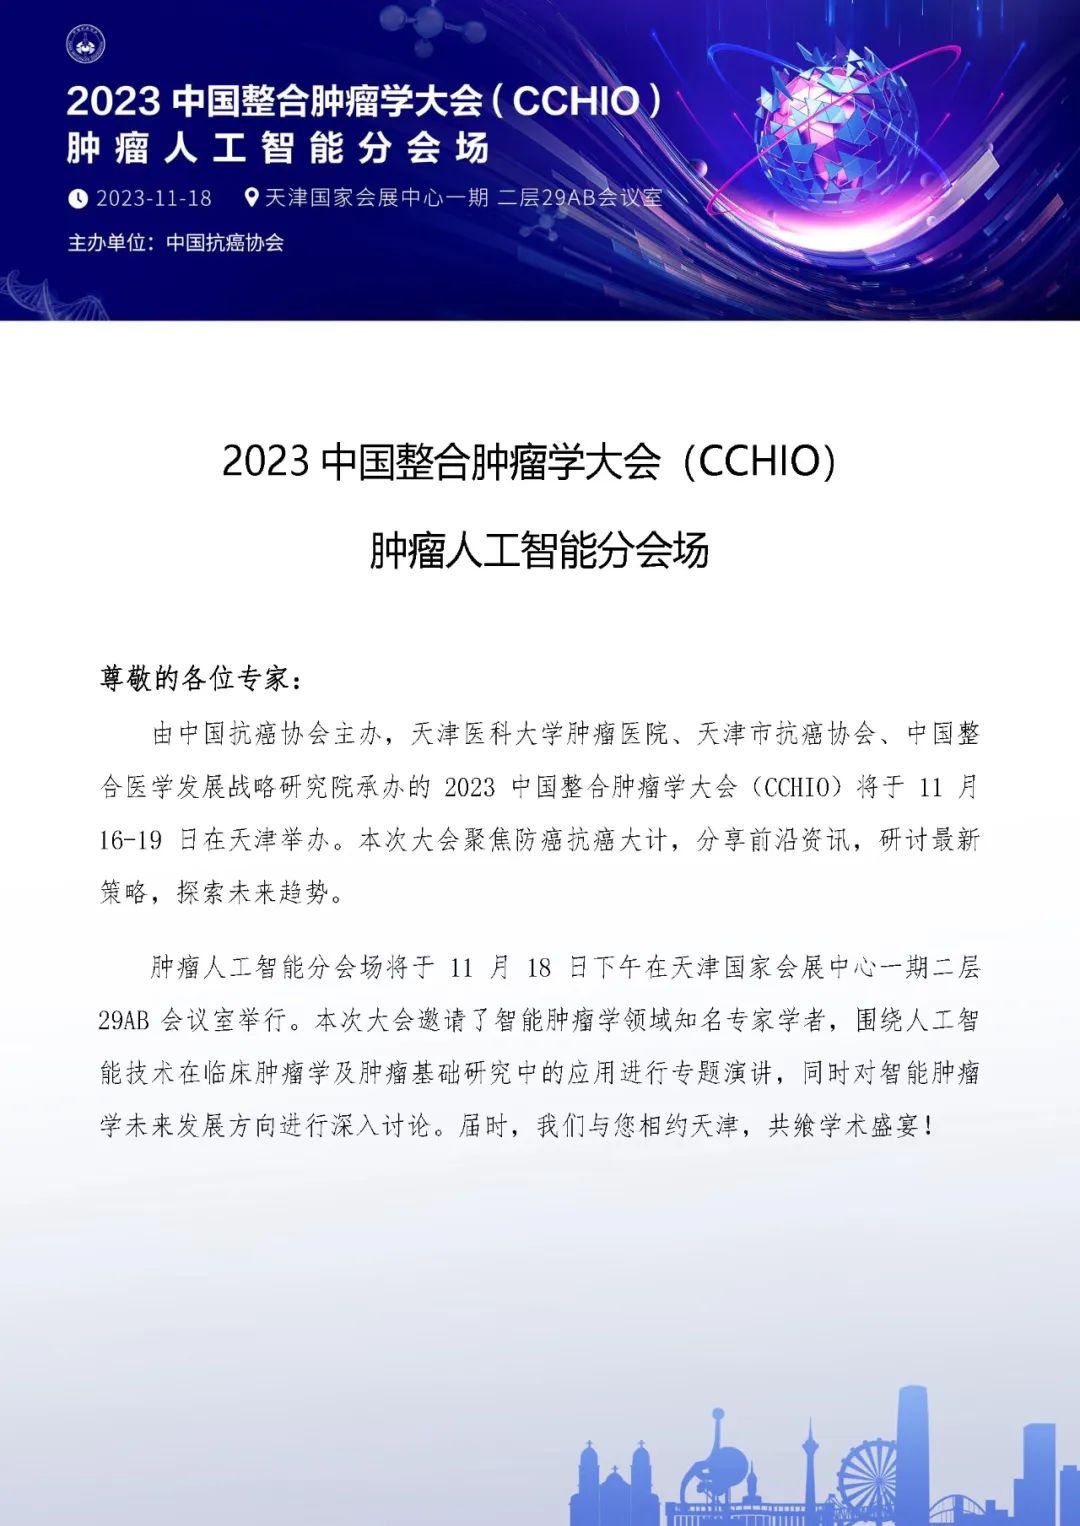 2023 CCHIO | 会议点播——<font color="red">肿瘤</font>人工智能<font color="red">分会</font>场